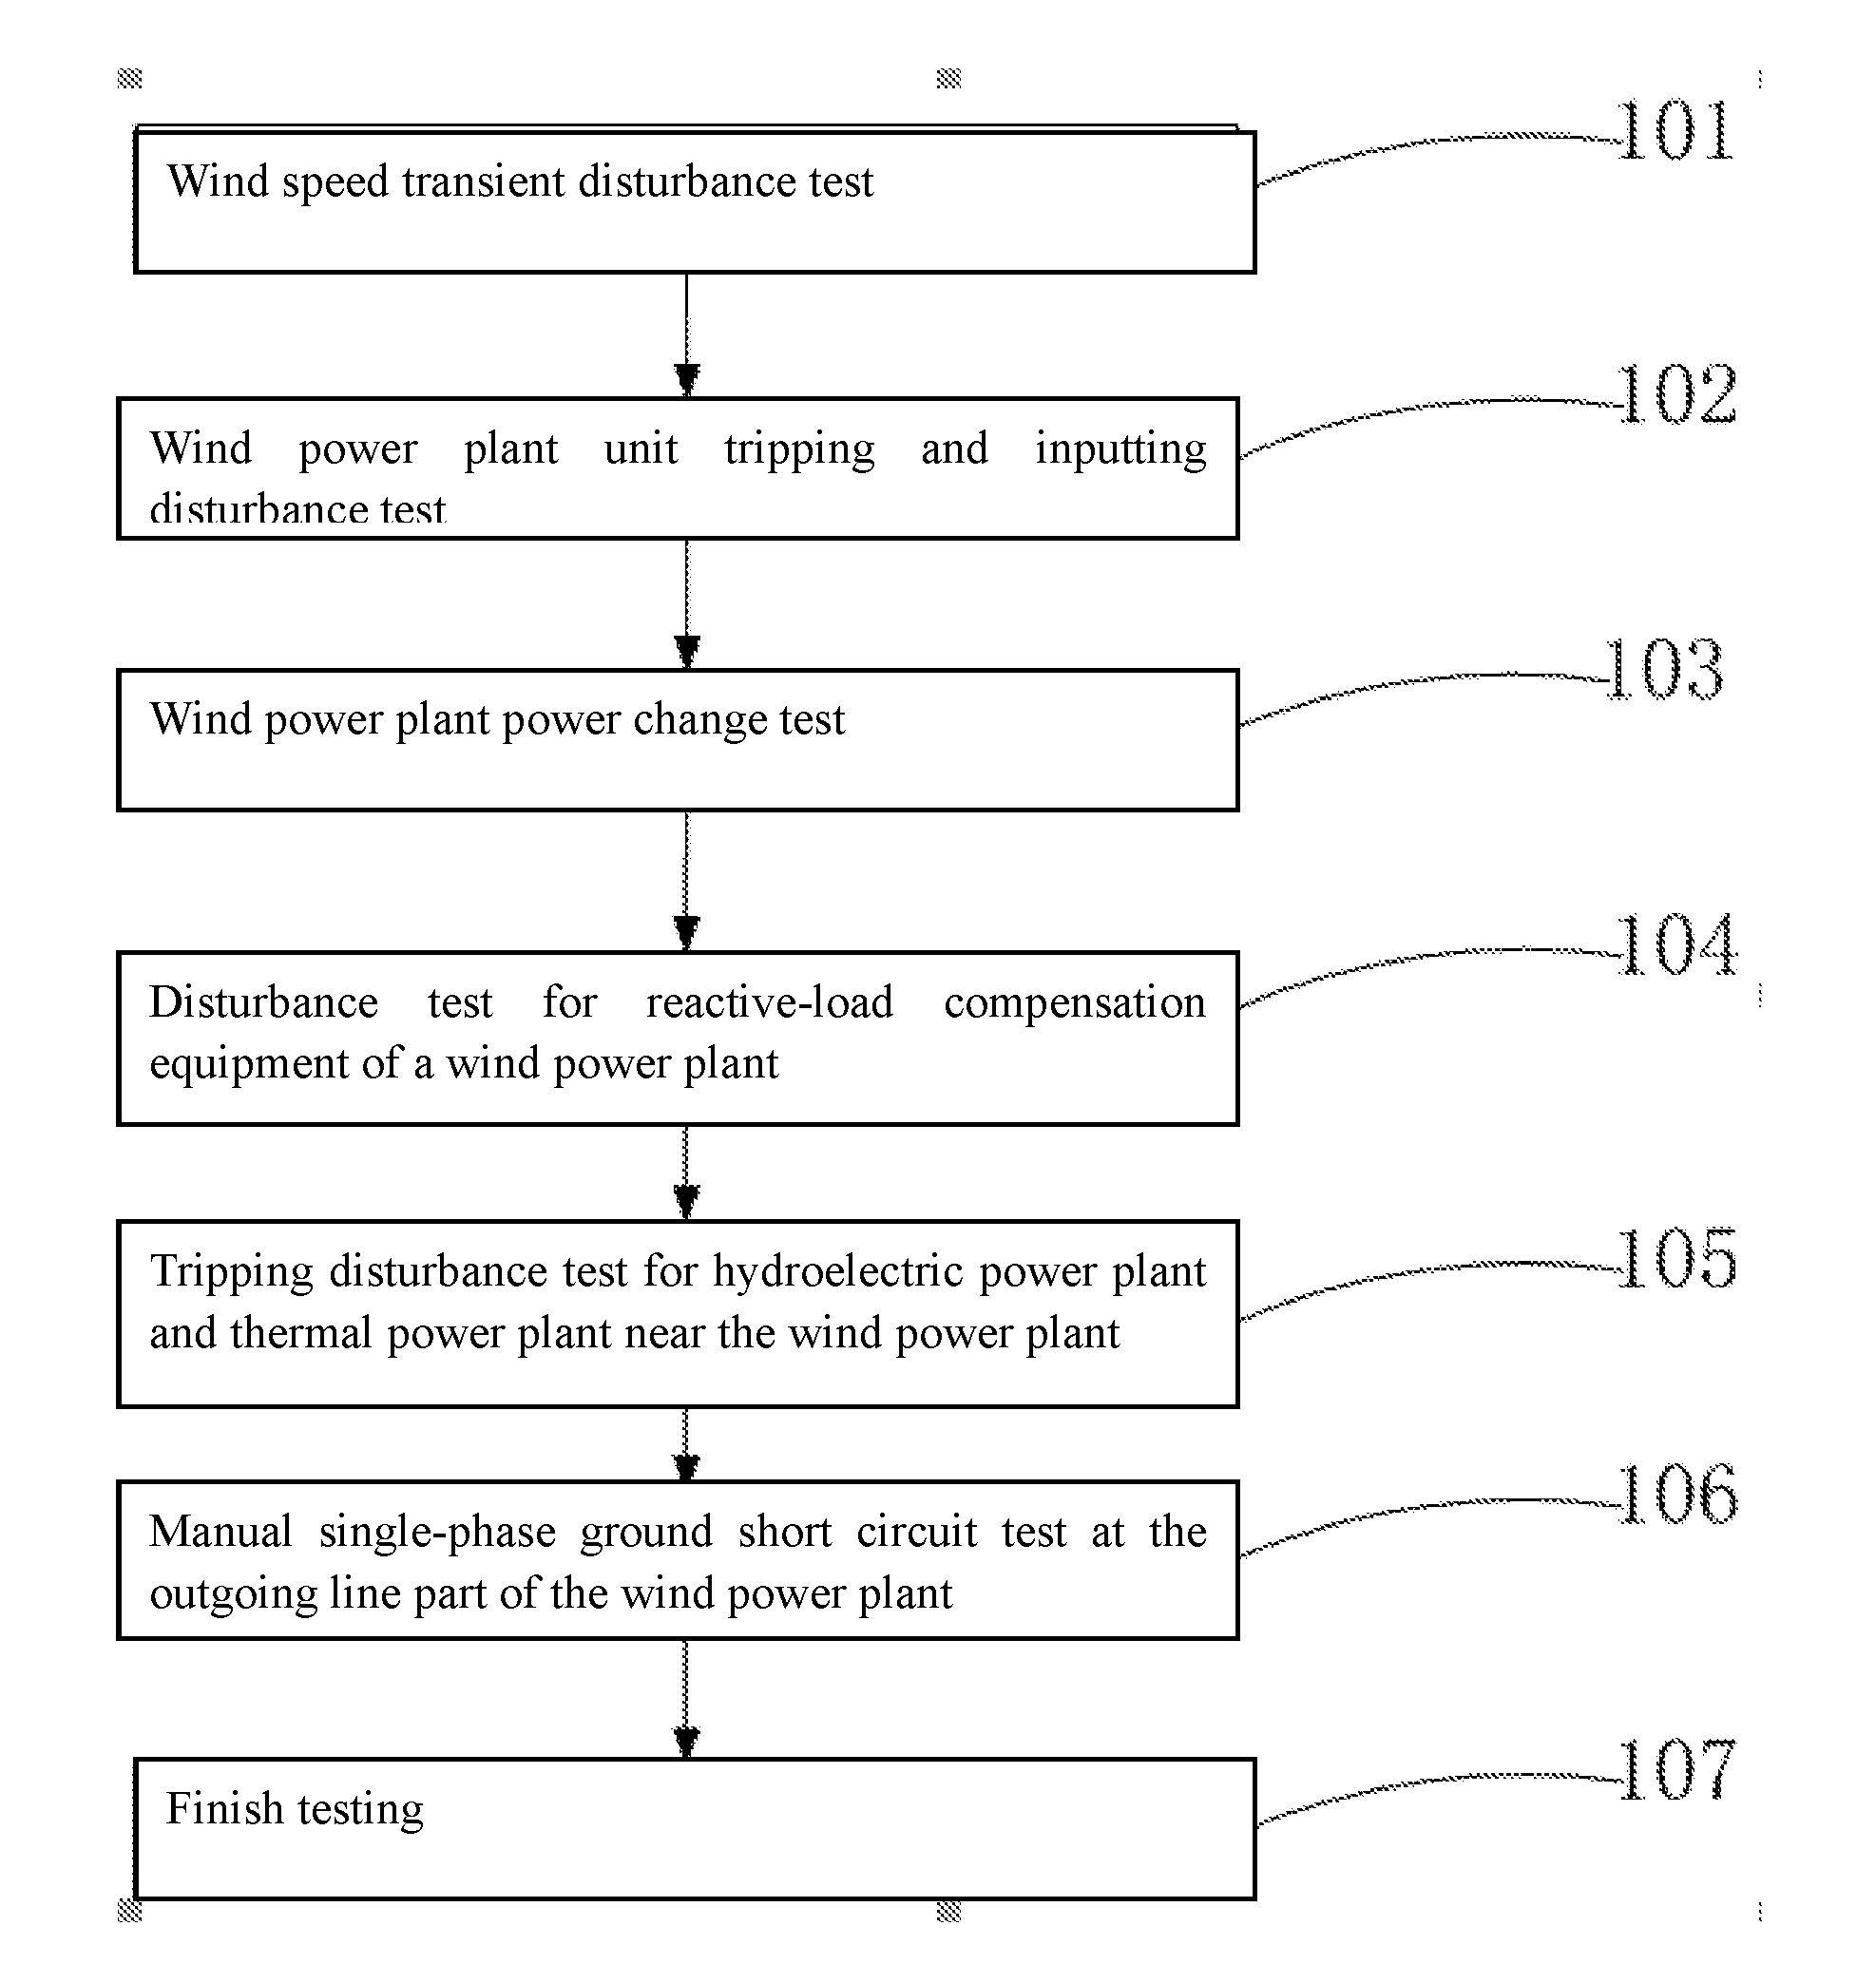 Method for testing dynamic model parameters of wind power plant